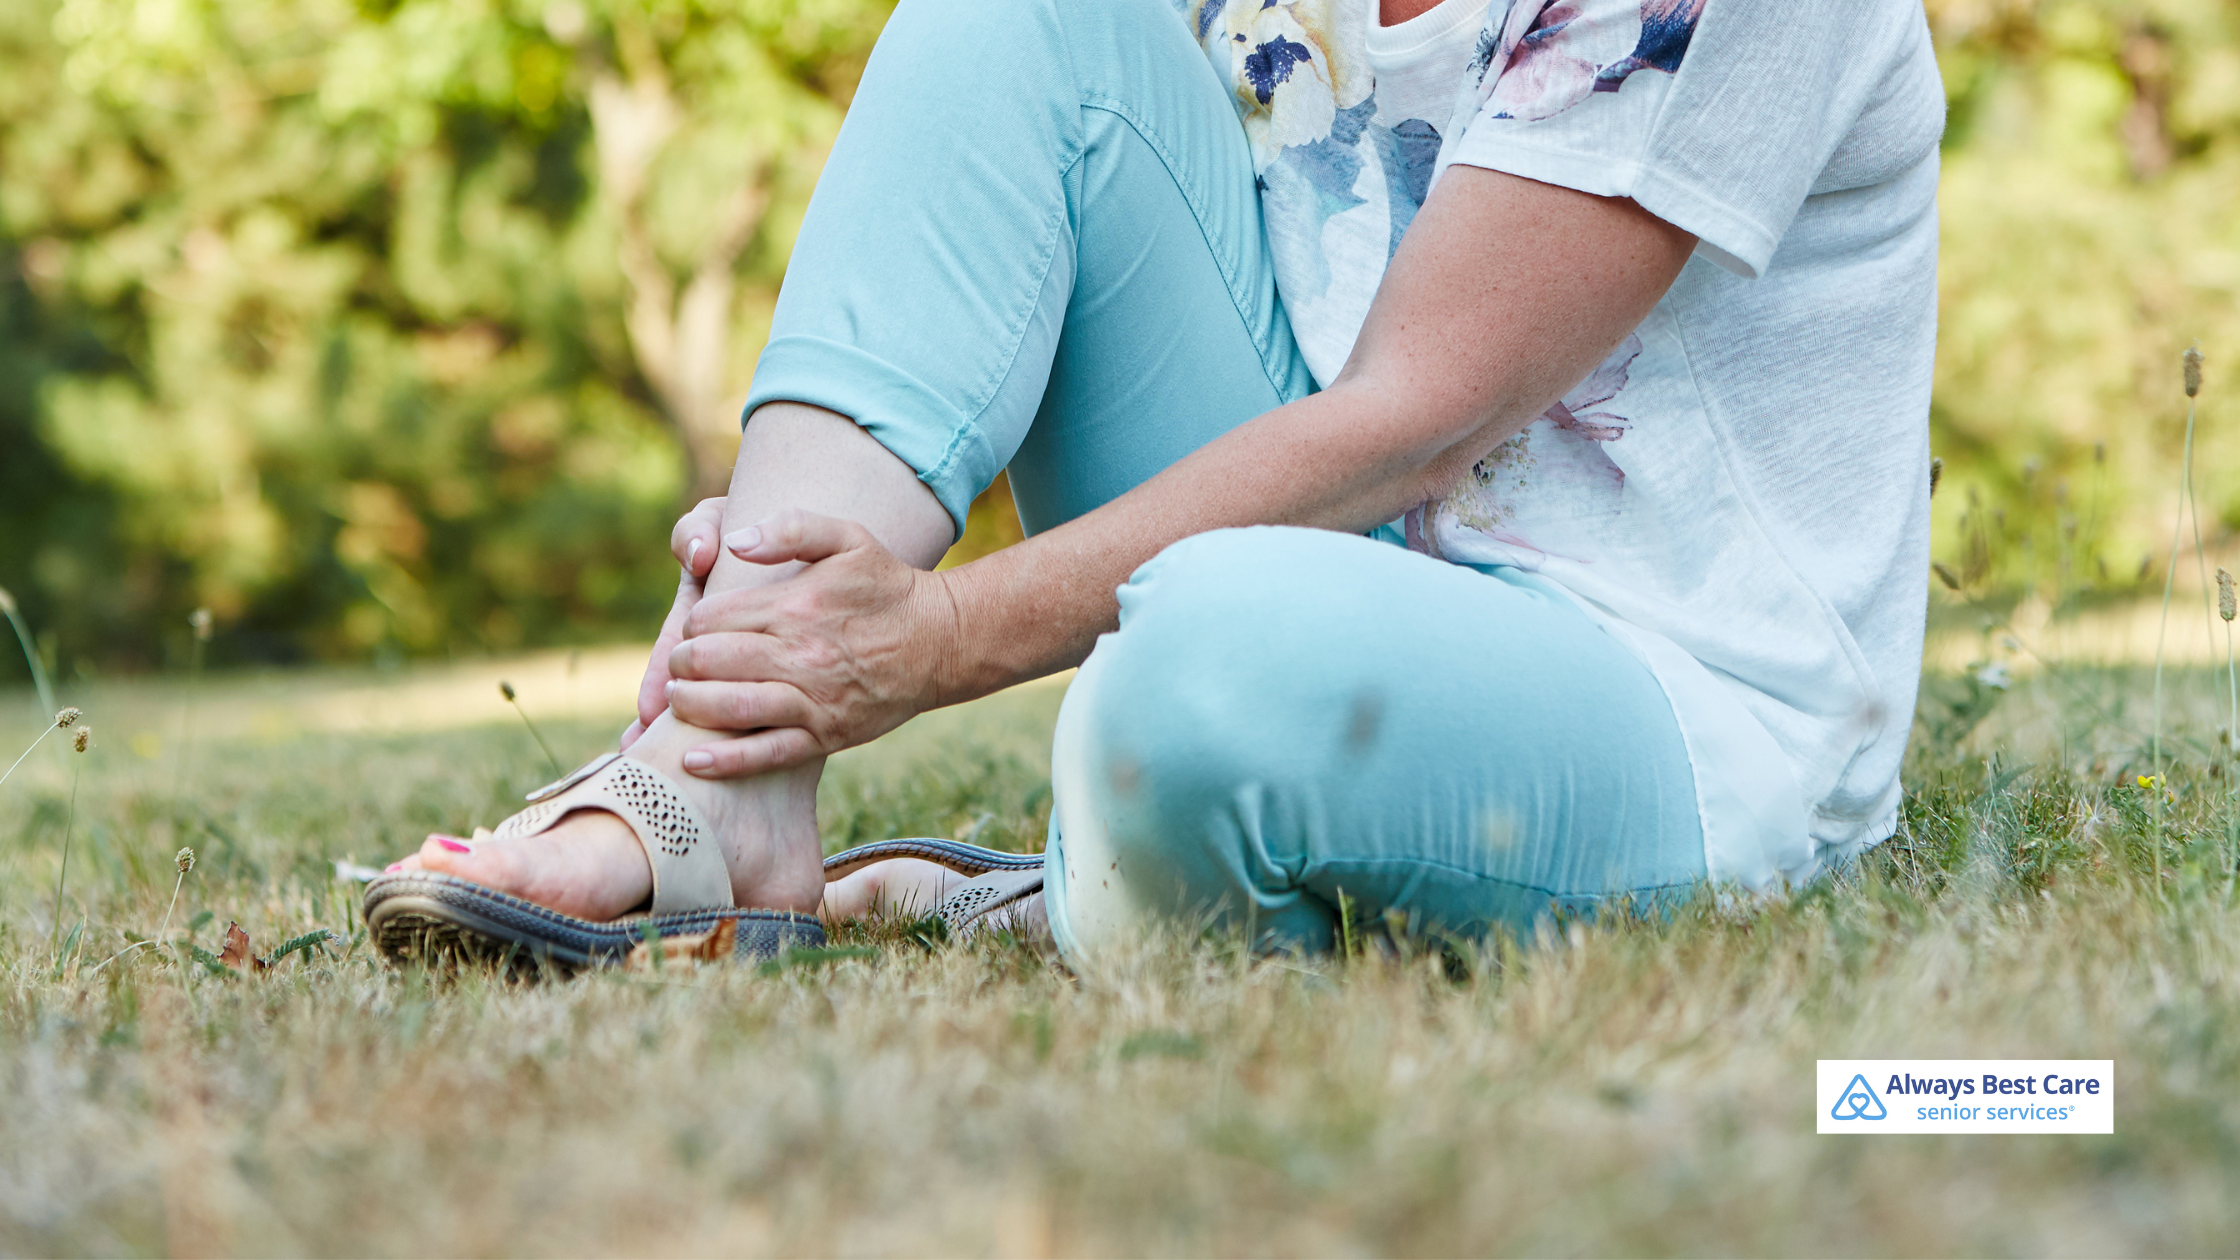 On Your Feet: Common Foot Problems for Seniors